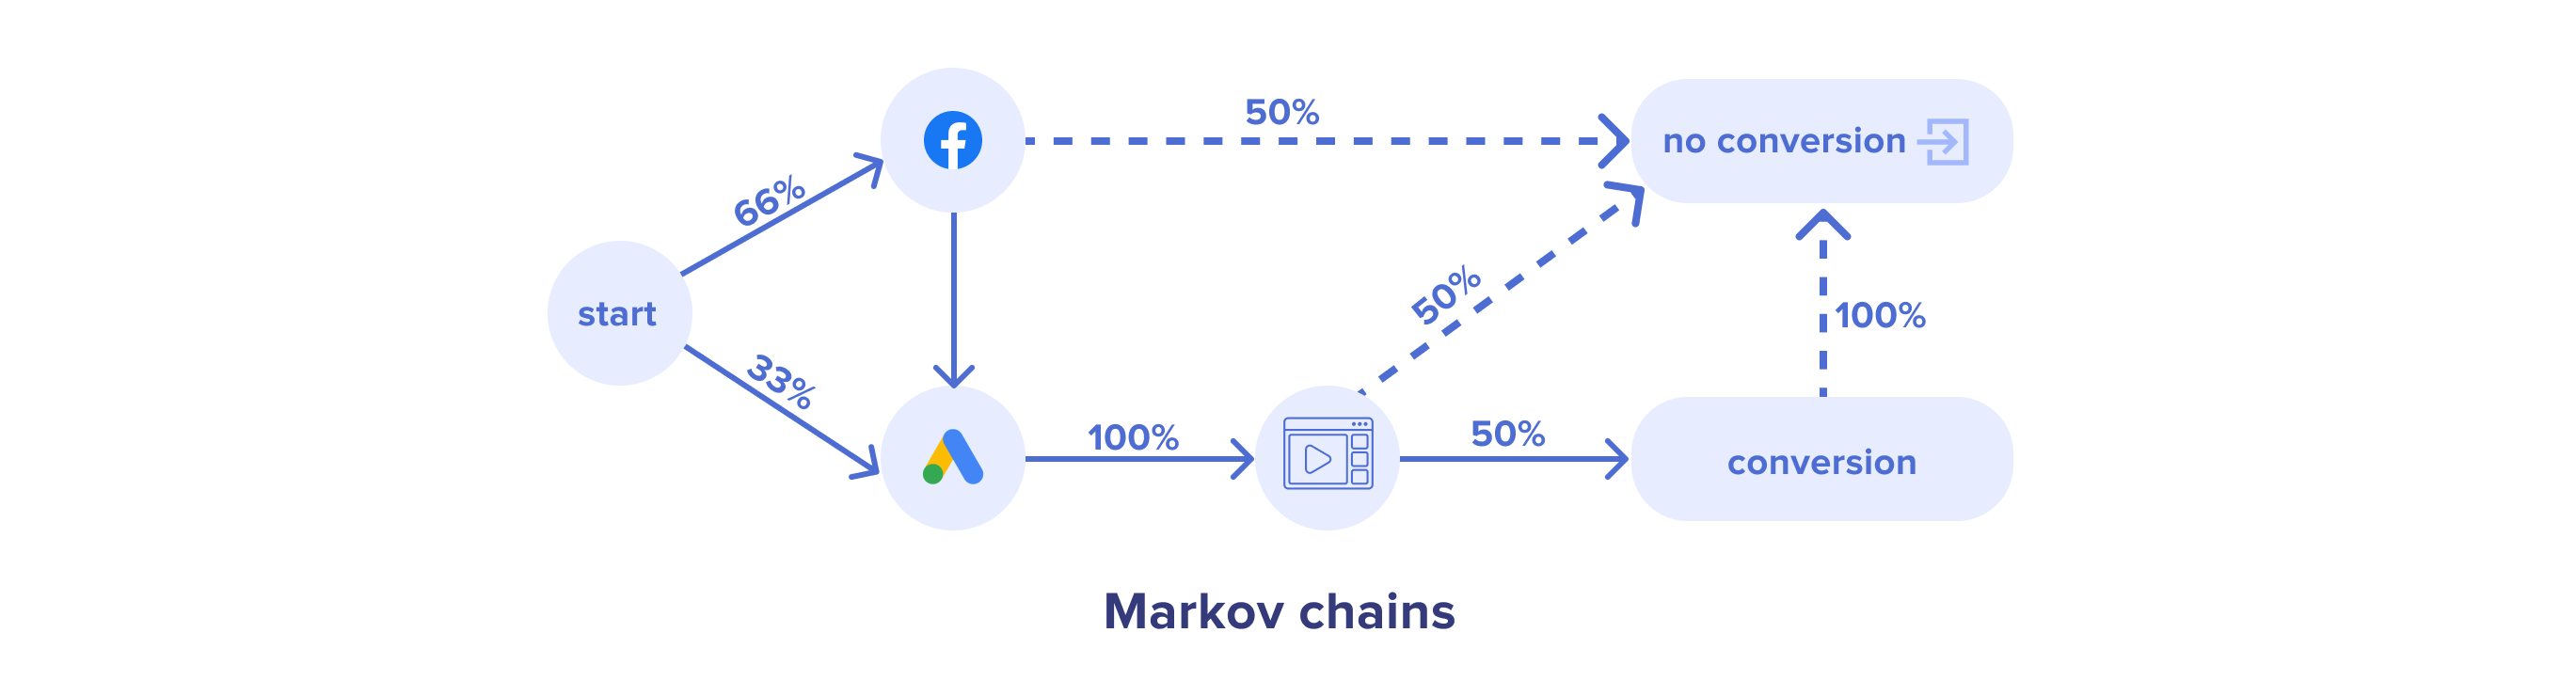 Types of data-driven attribution models: Markov chains